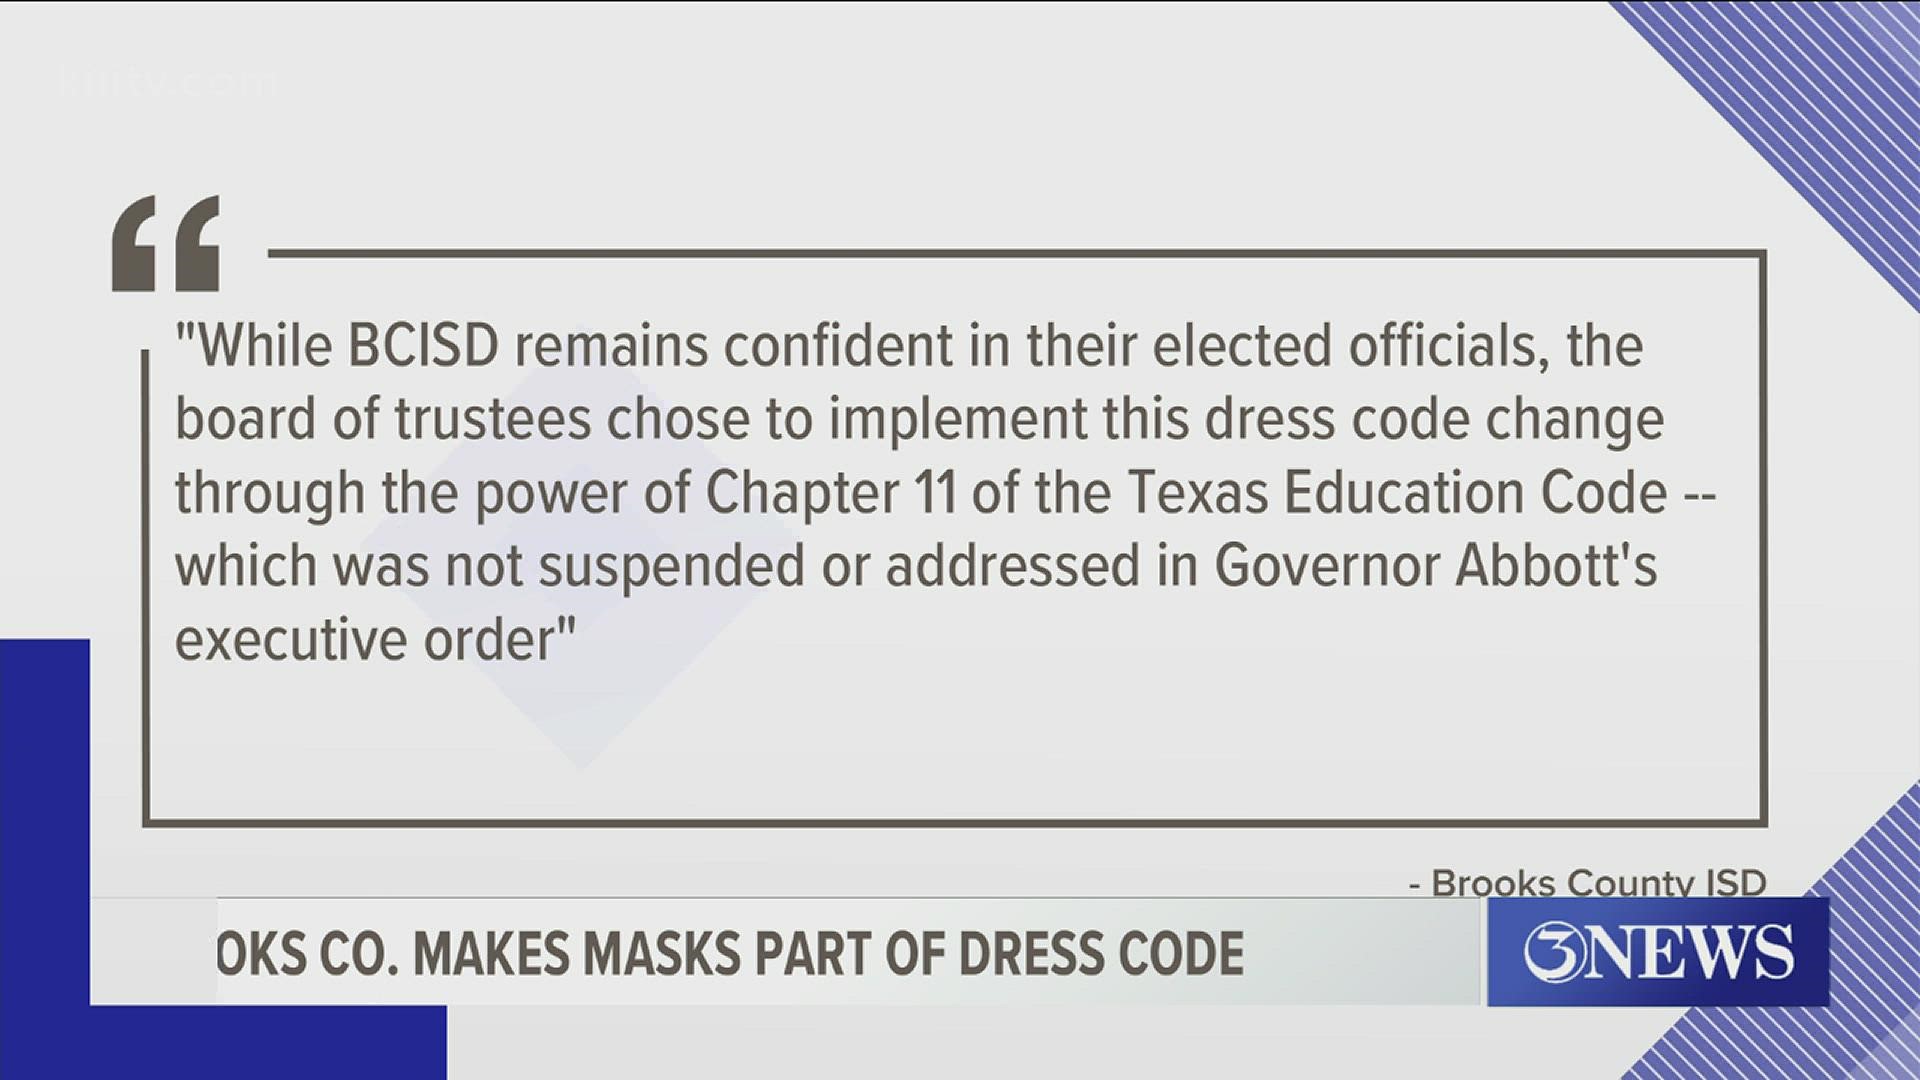 "The board of trustees chose to implement this dress code change through the power of Chapter 11 of the Texas Education Code."